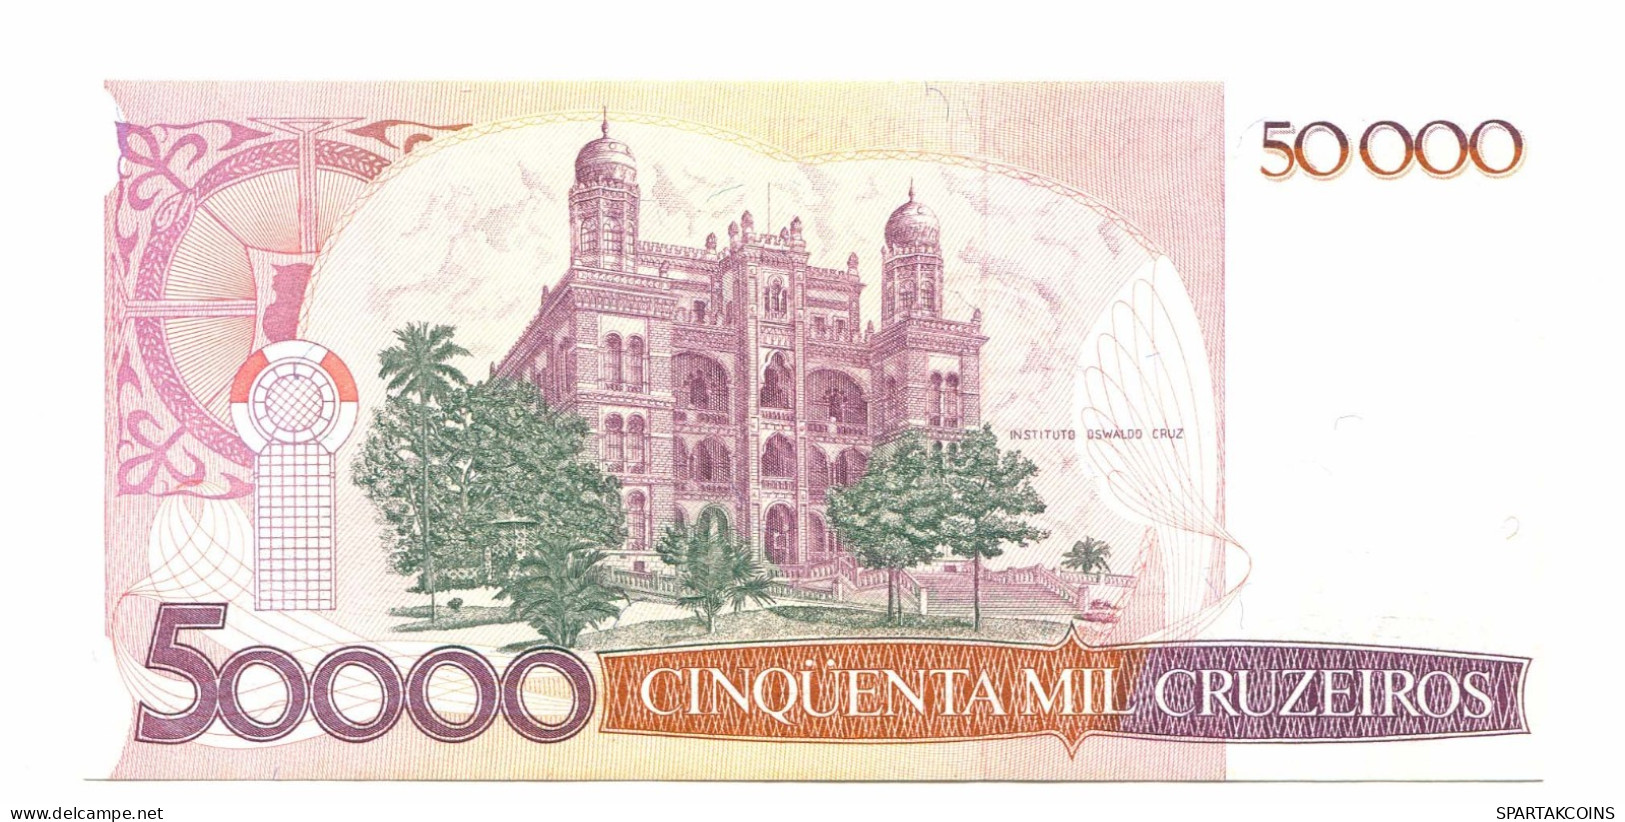 BRAZIL REPLACEMENT NOTE Star*A 50 CRUZADOS ON 50000 CRUZEIROS 1986 UNC P10994.6 - [11] Local Banknote Issues